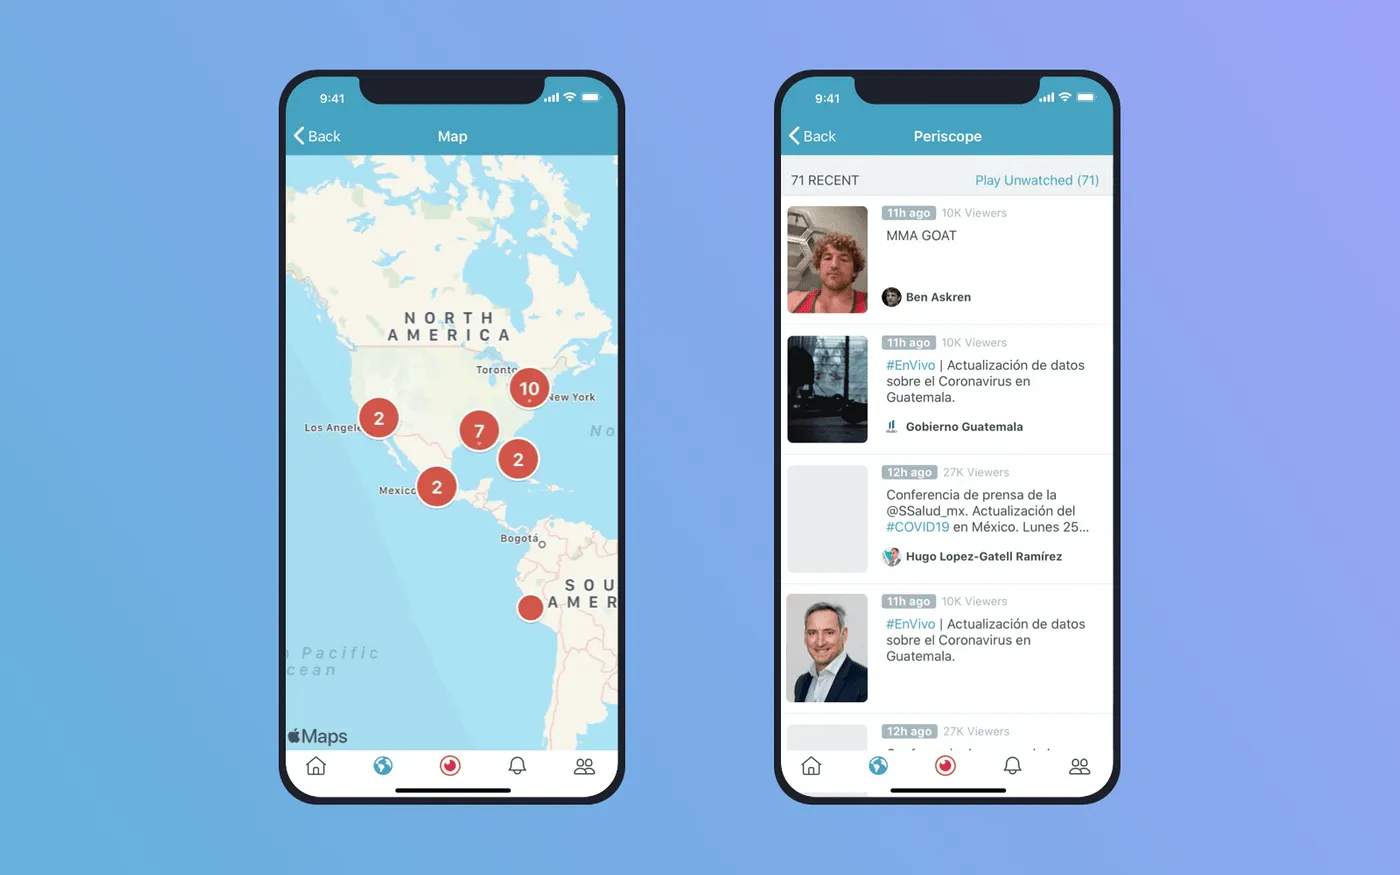 Screens with a list of broadcasts in Periscope